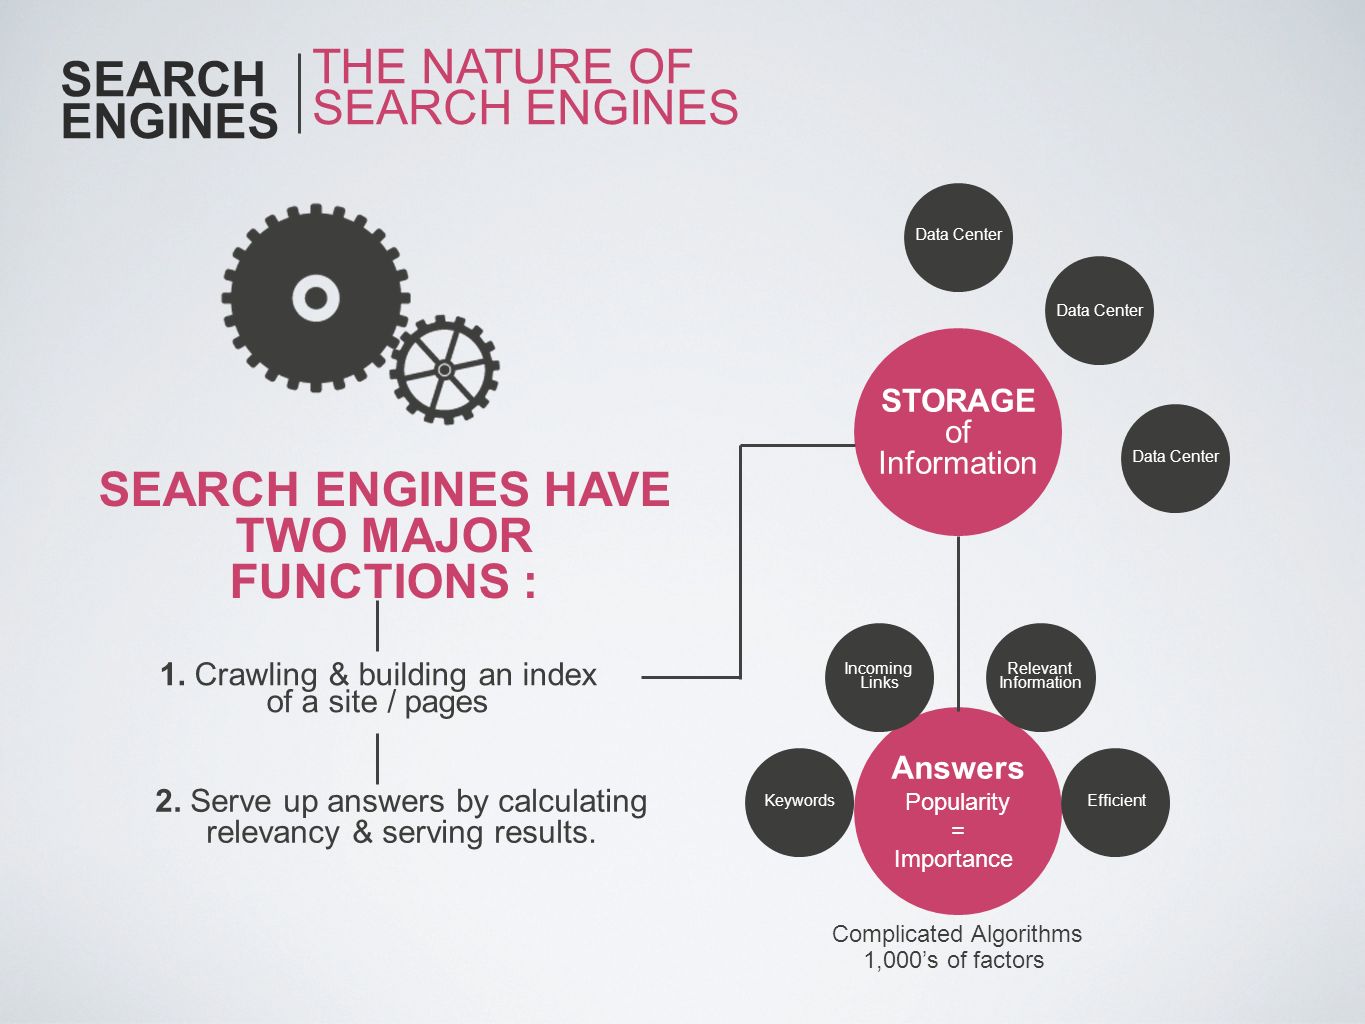 SEARCH ENGINES HAVE TWO MAJOR FUNCTIONS :